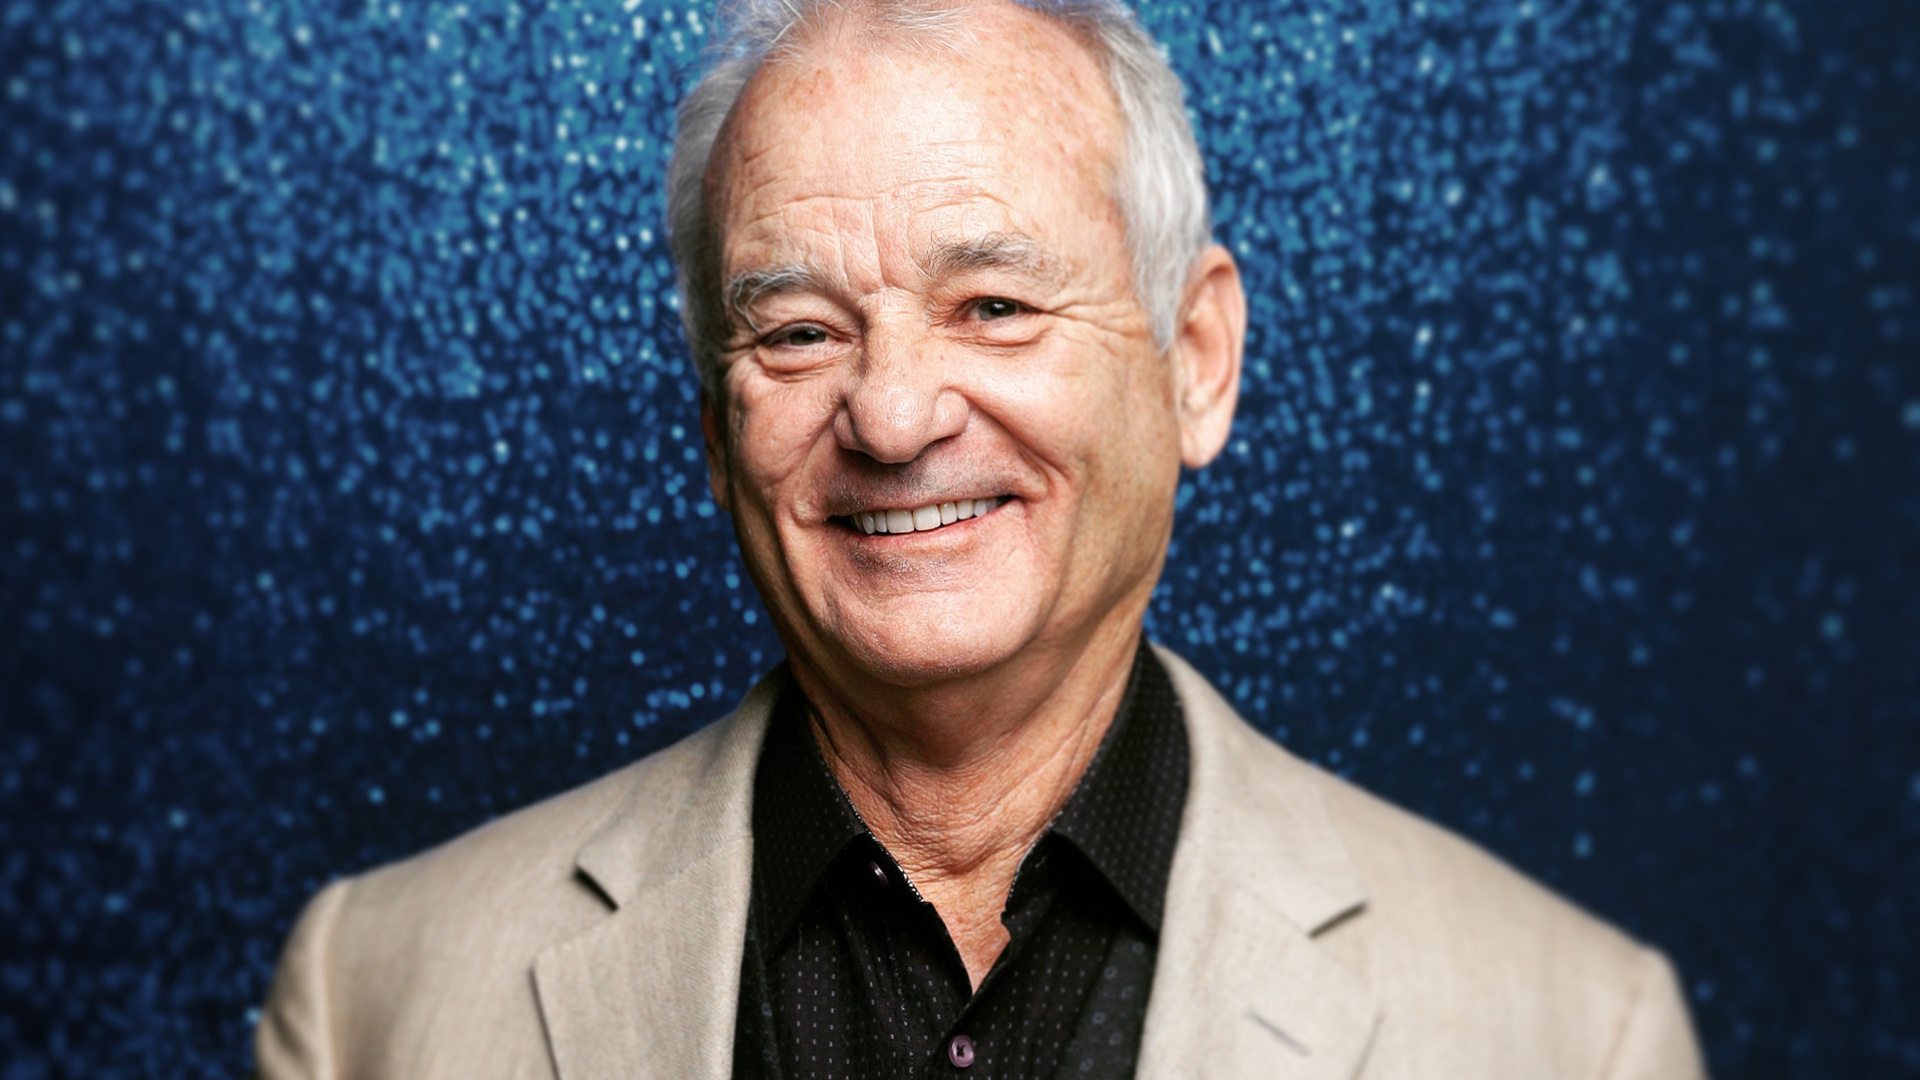 Bill Murray, Movies, Reachable actor, 800 number, 1920x1080 Full HD Desktop